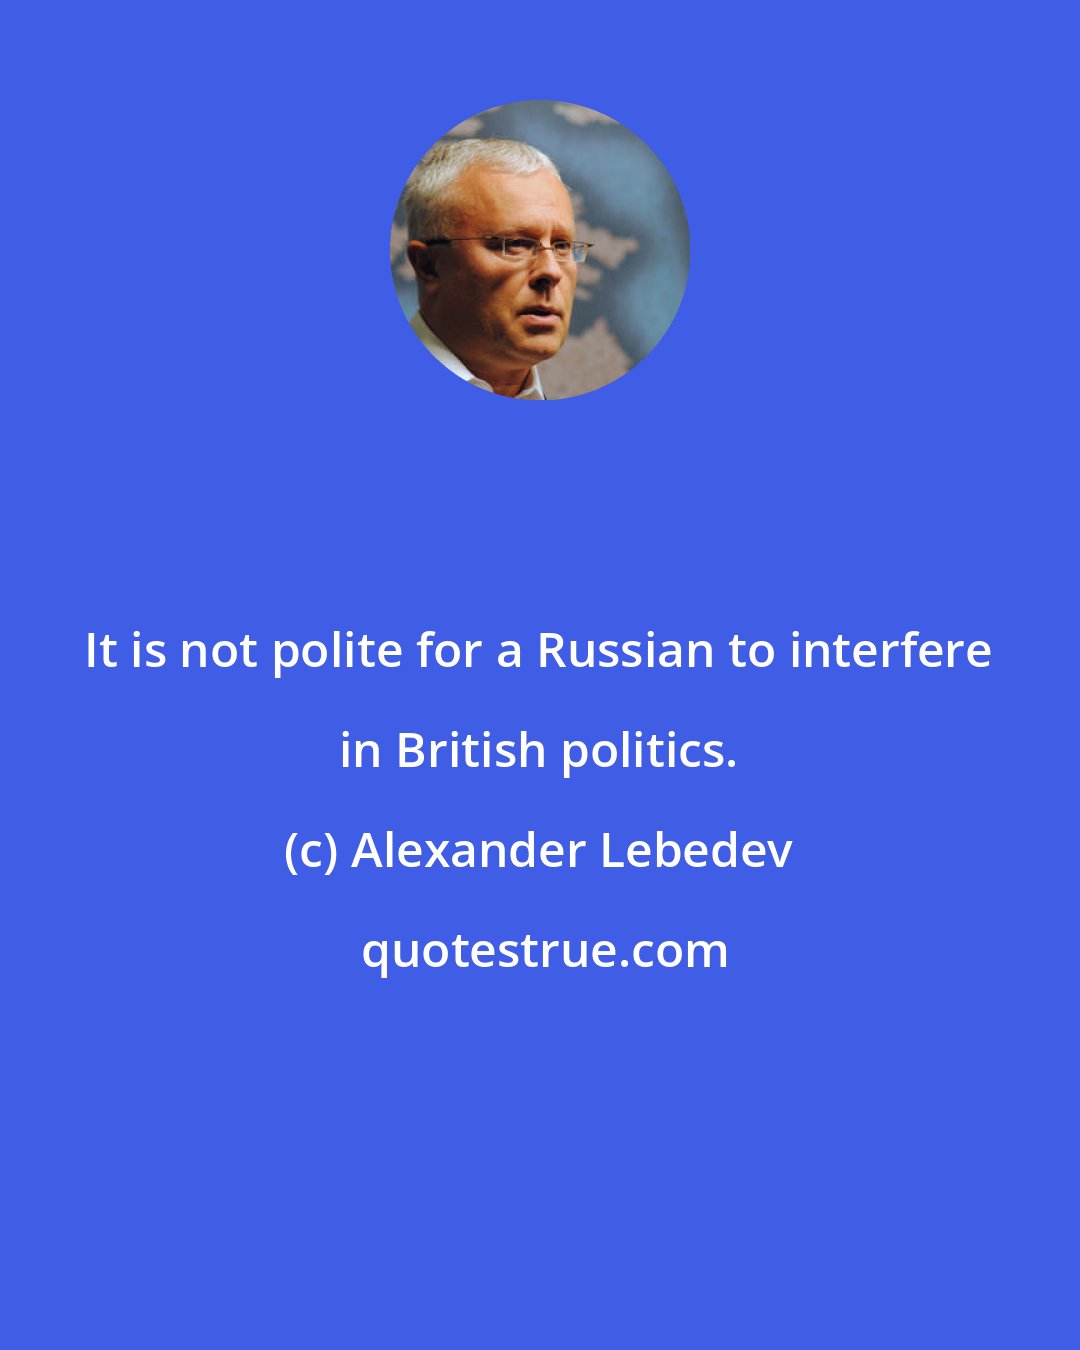 Alexander Lebedev: It is not polite for a Russian to interfere in British politics.